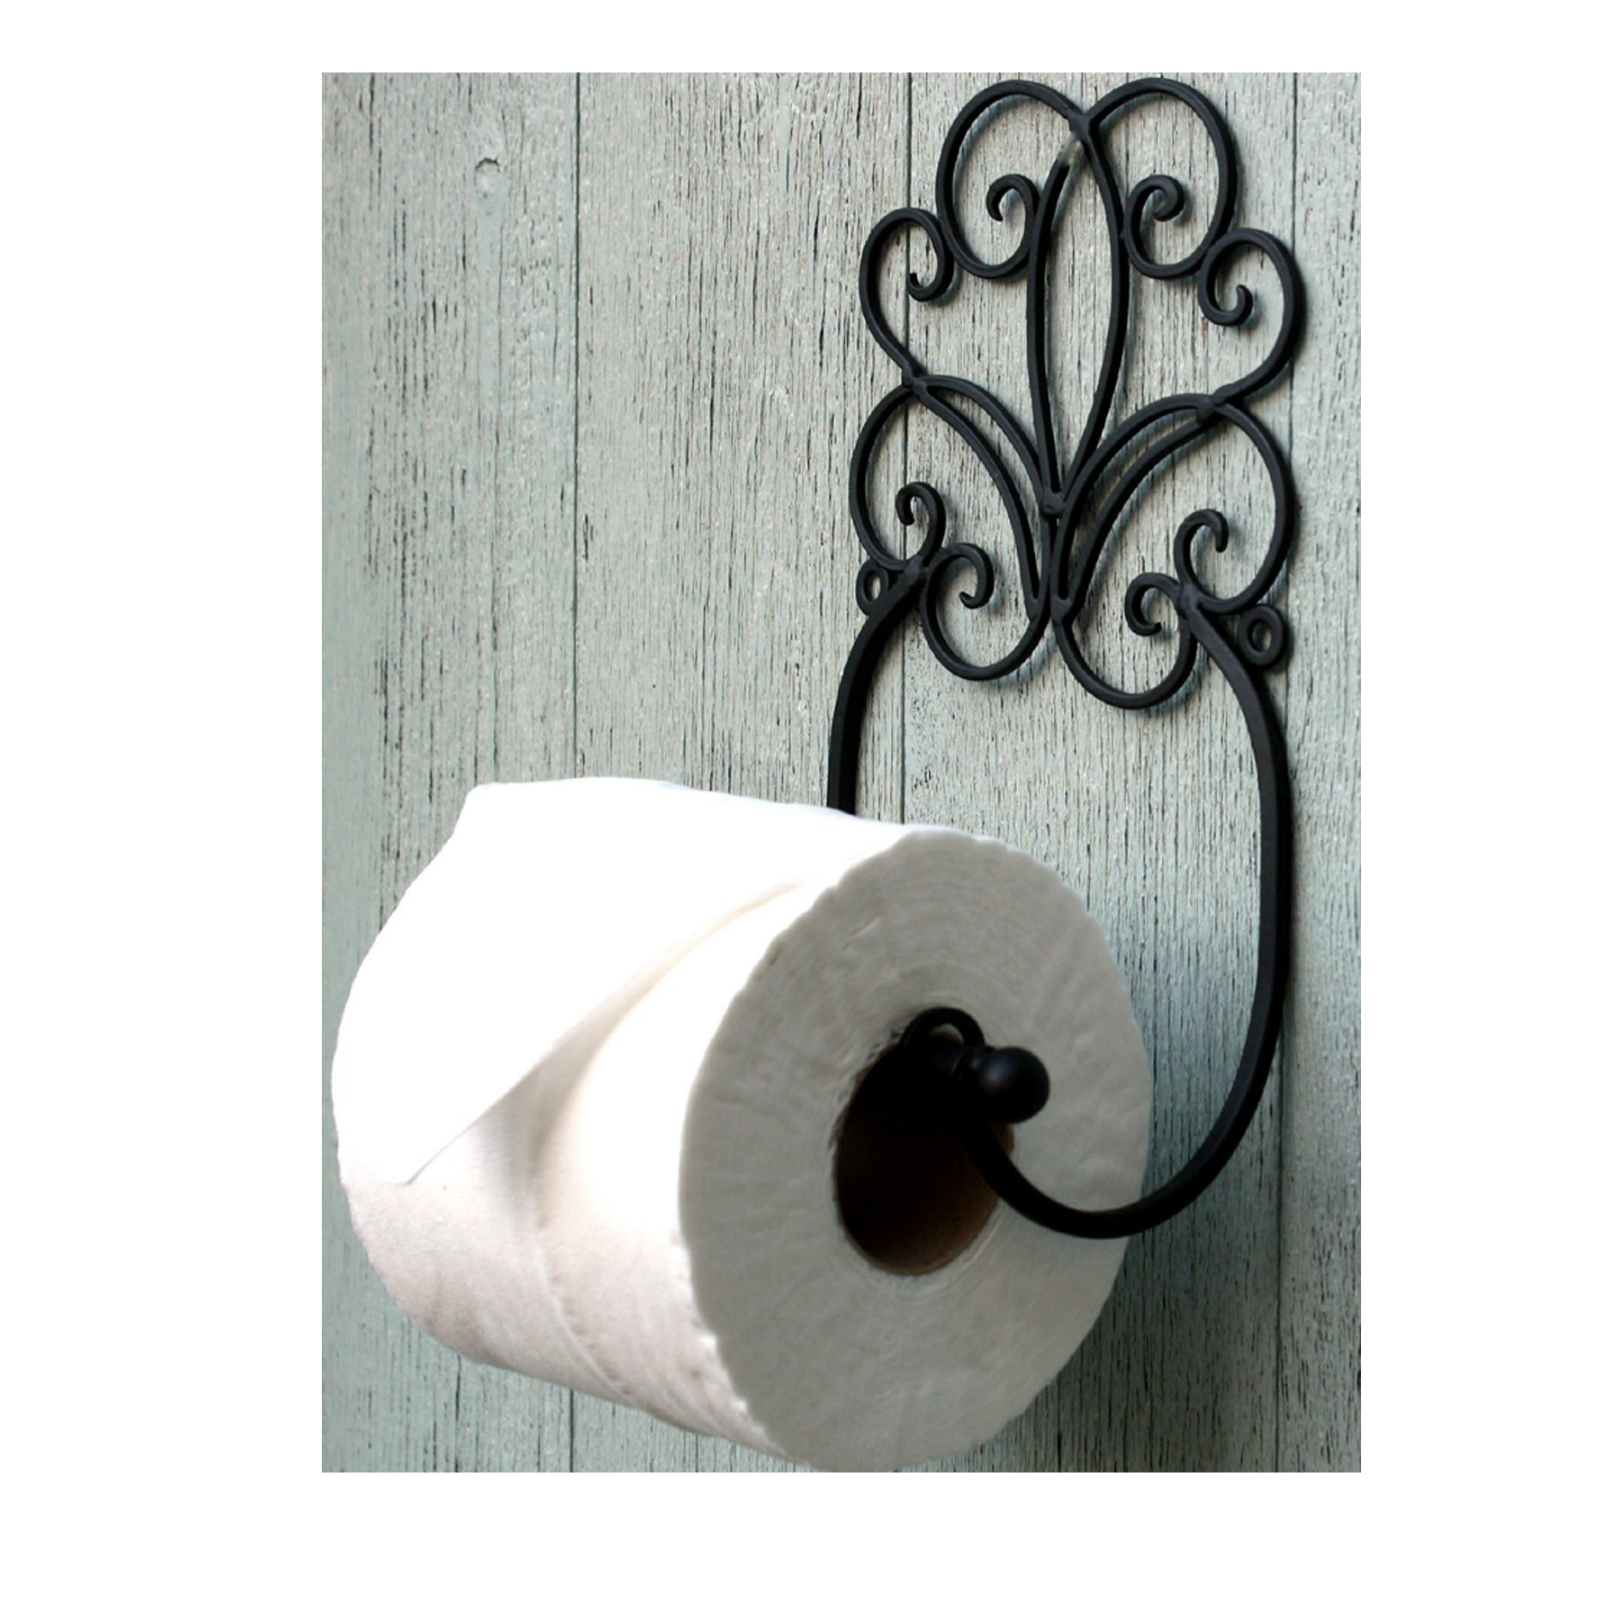 Black Scroll Wall Mounted Toilet Roll Holder